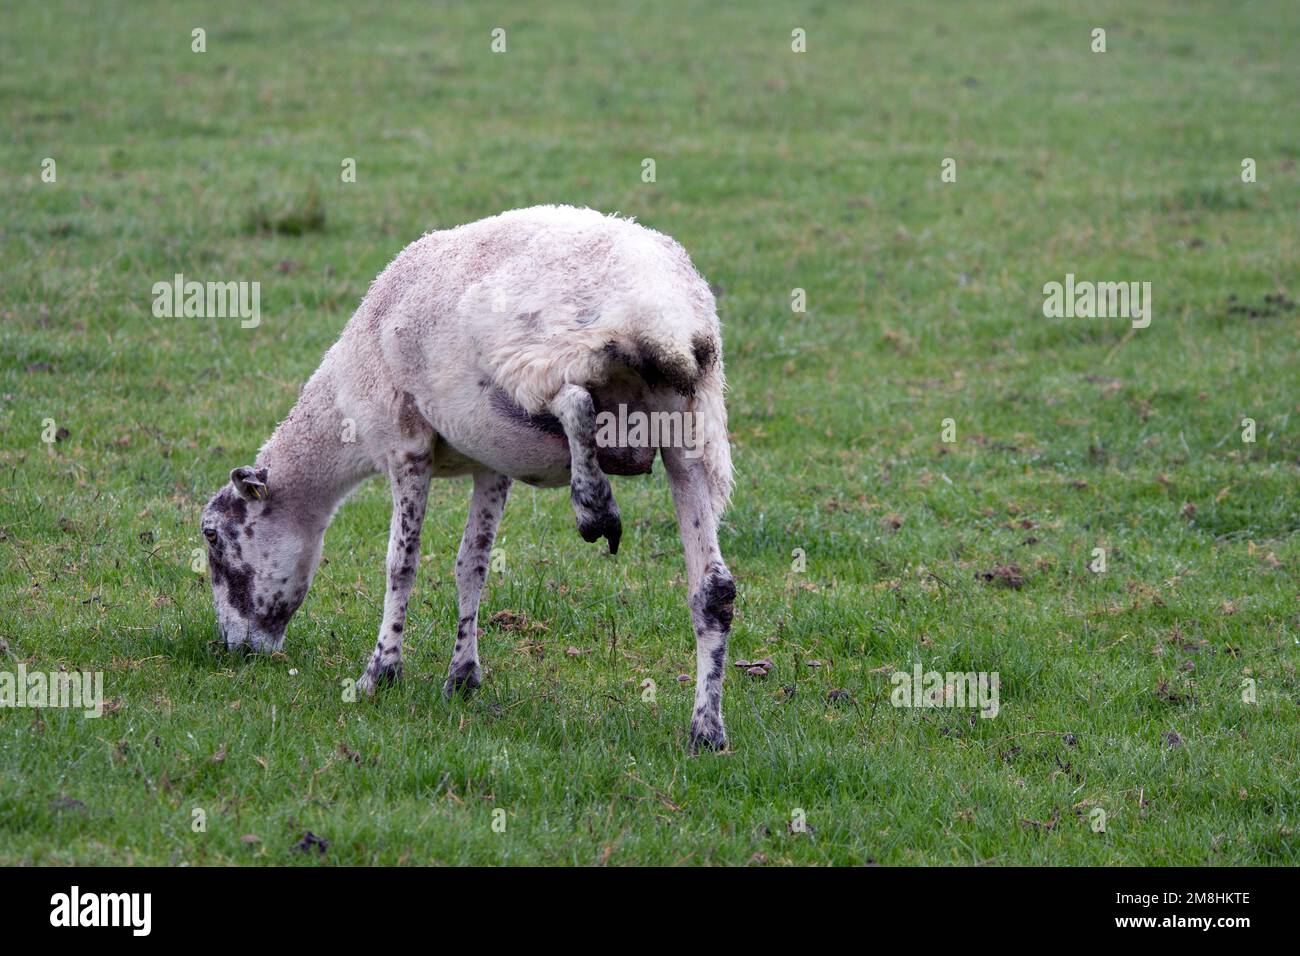 Foot health problems with sheep Stock Photo